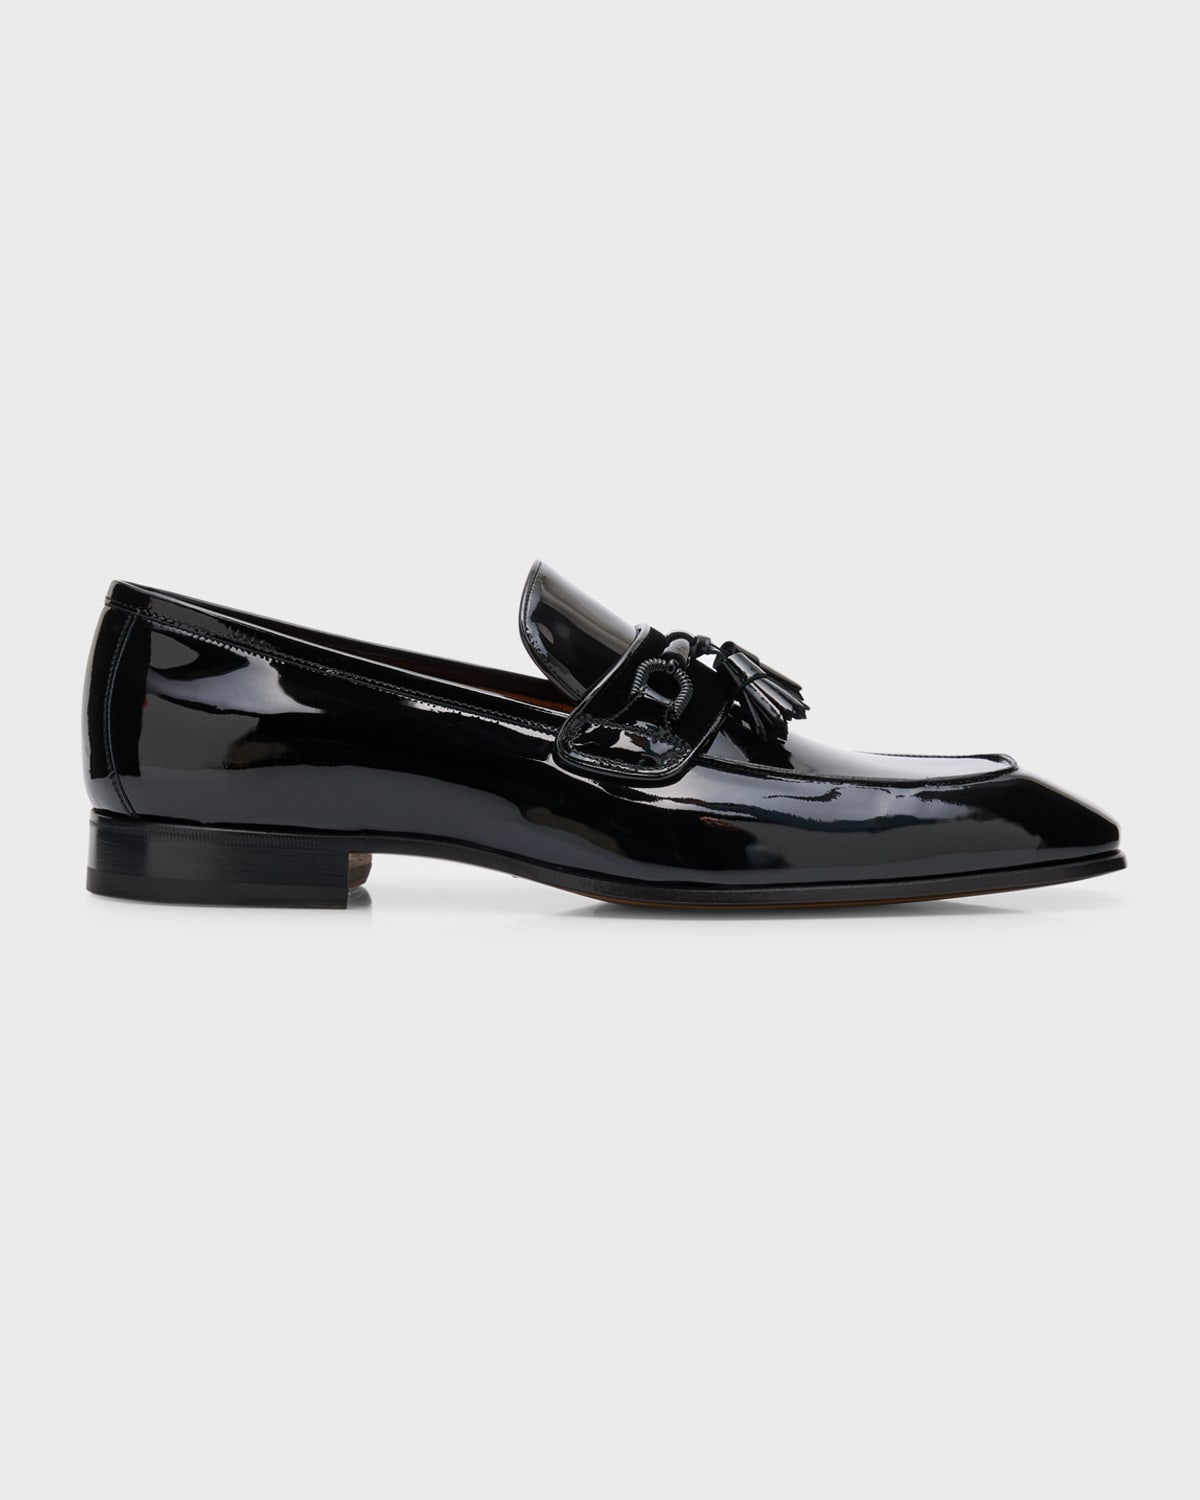 TOM FORD Men's Patent Leather Tassel Loafers | Neiman Marcus